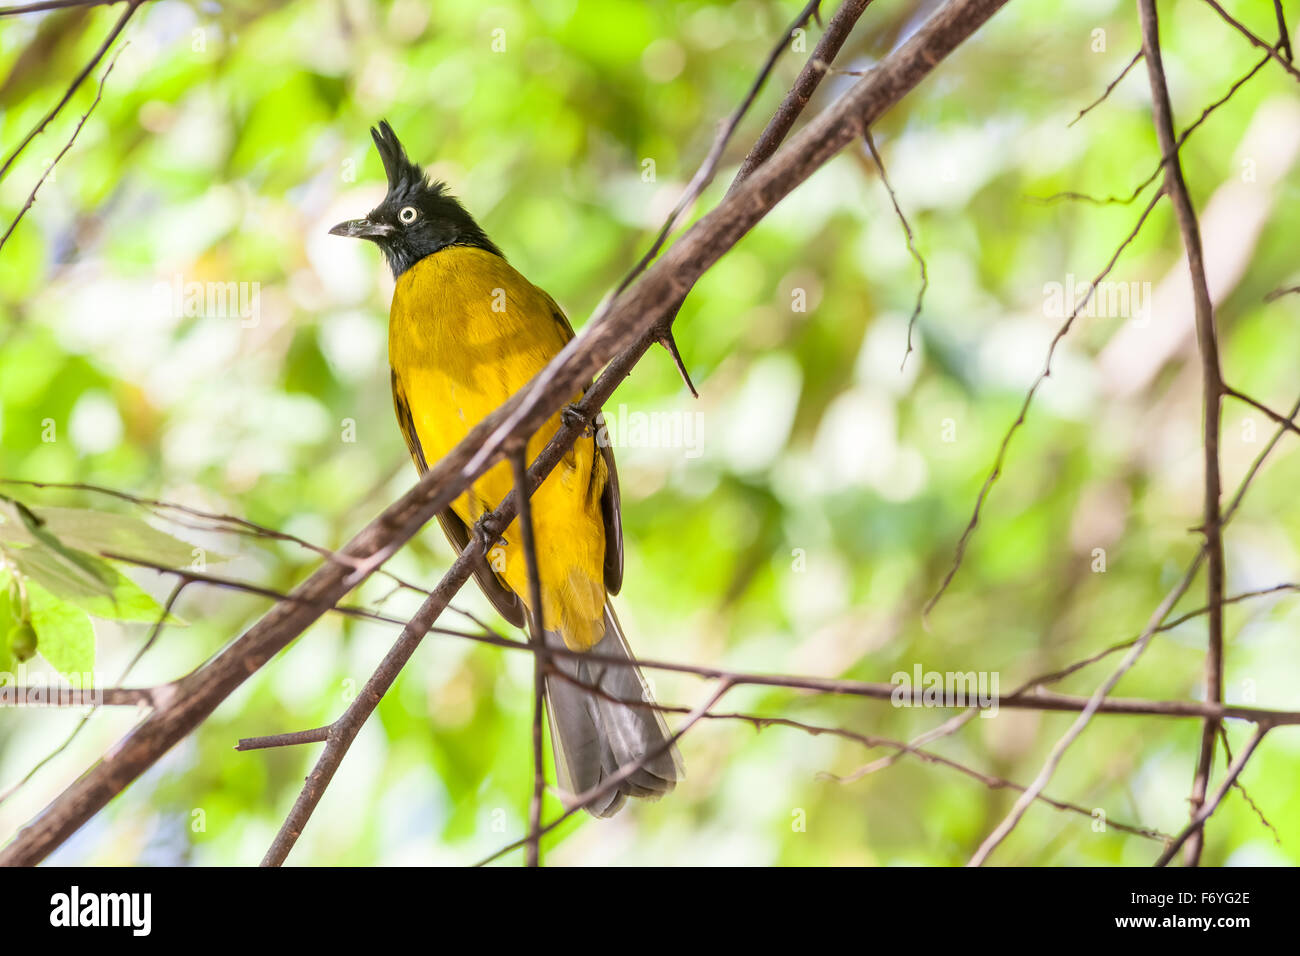 in the forest in Thailand there is a Black crested bulbul on a twig on lookout Stock Photo